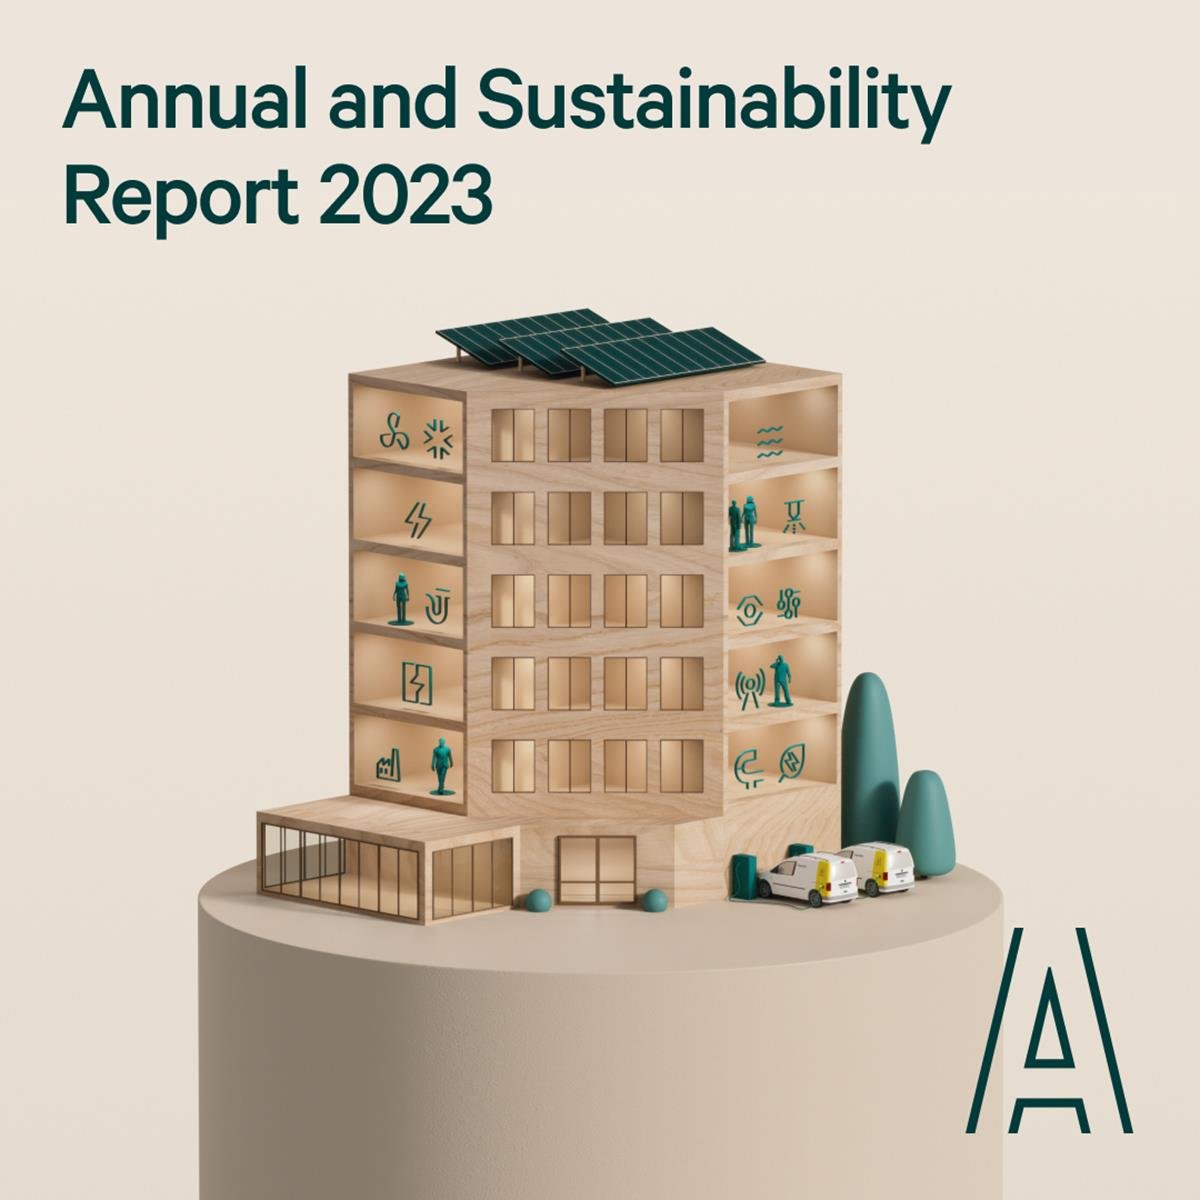 Assemblin’s Annual and Sustainability Report for 2023 is now published